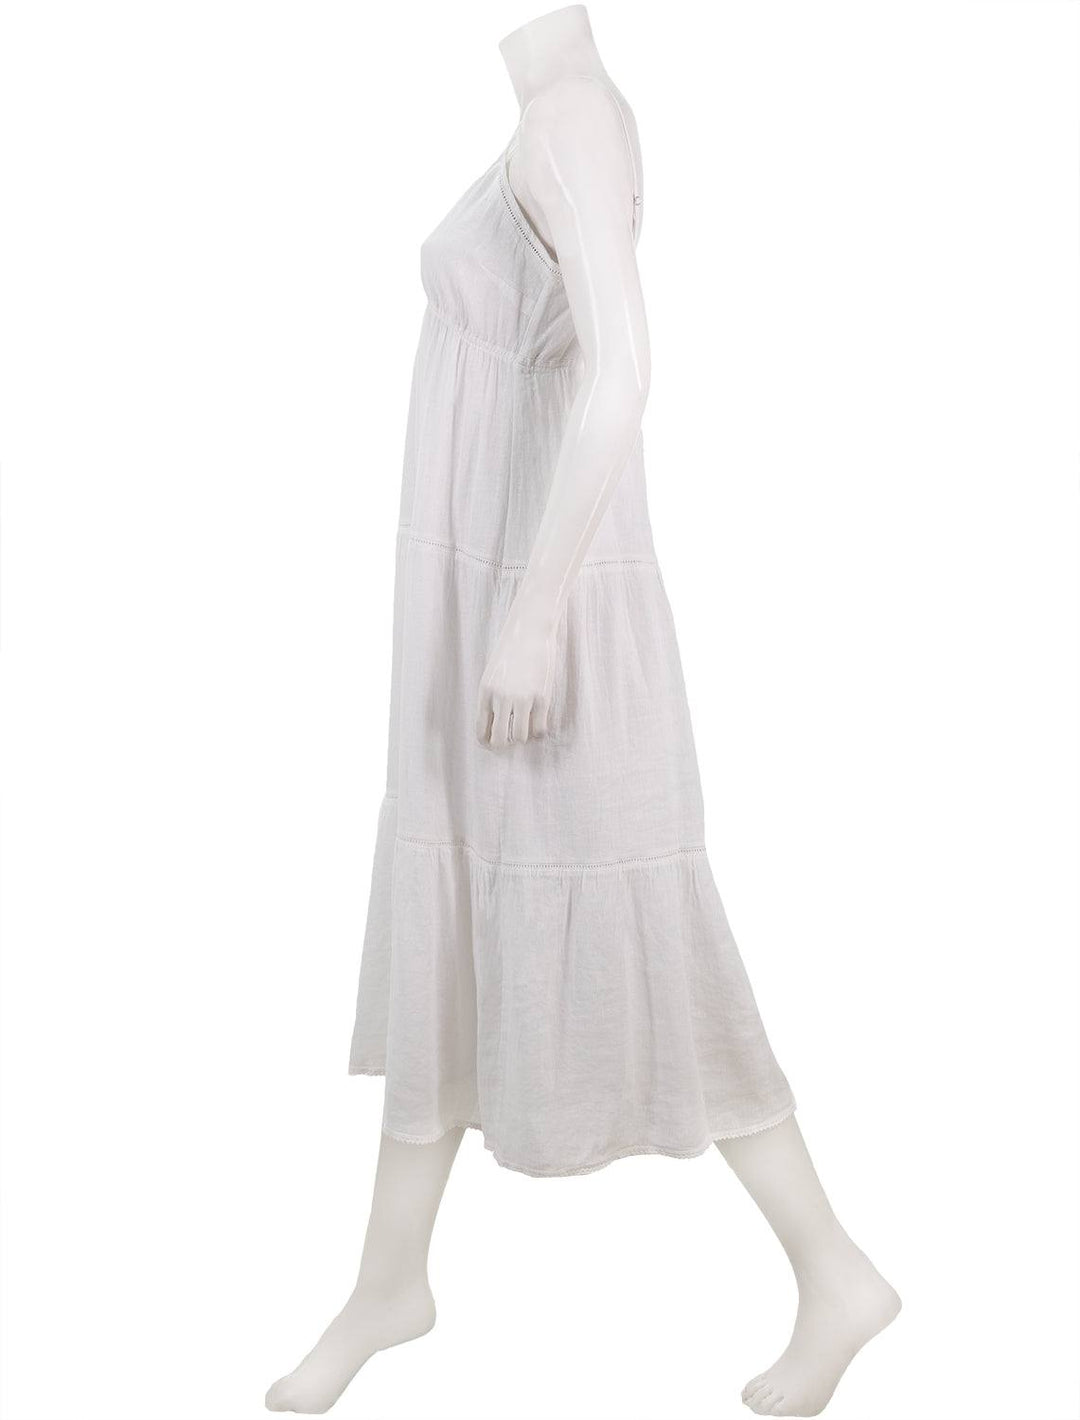 Side view of Rails' avril dress in white lace detail.